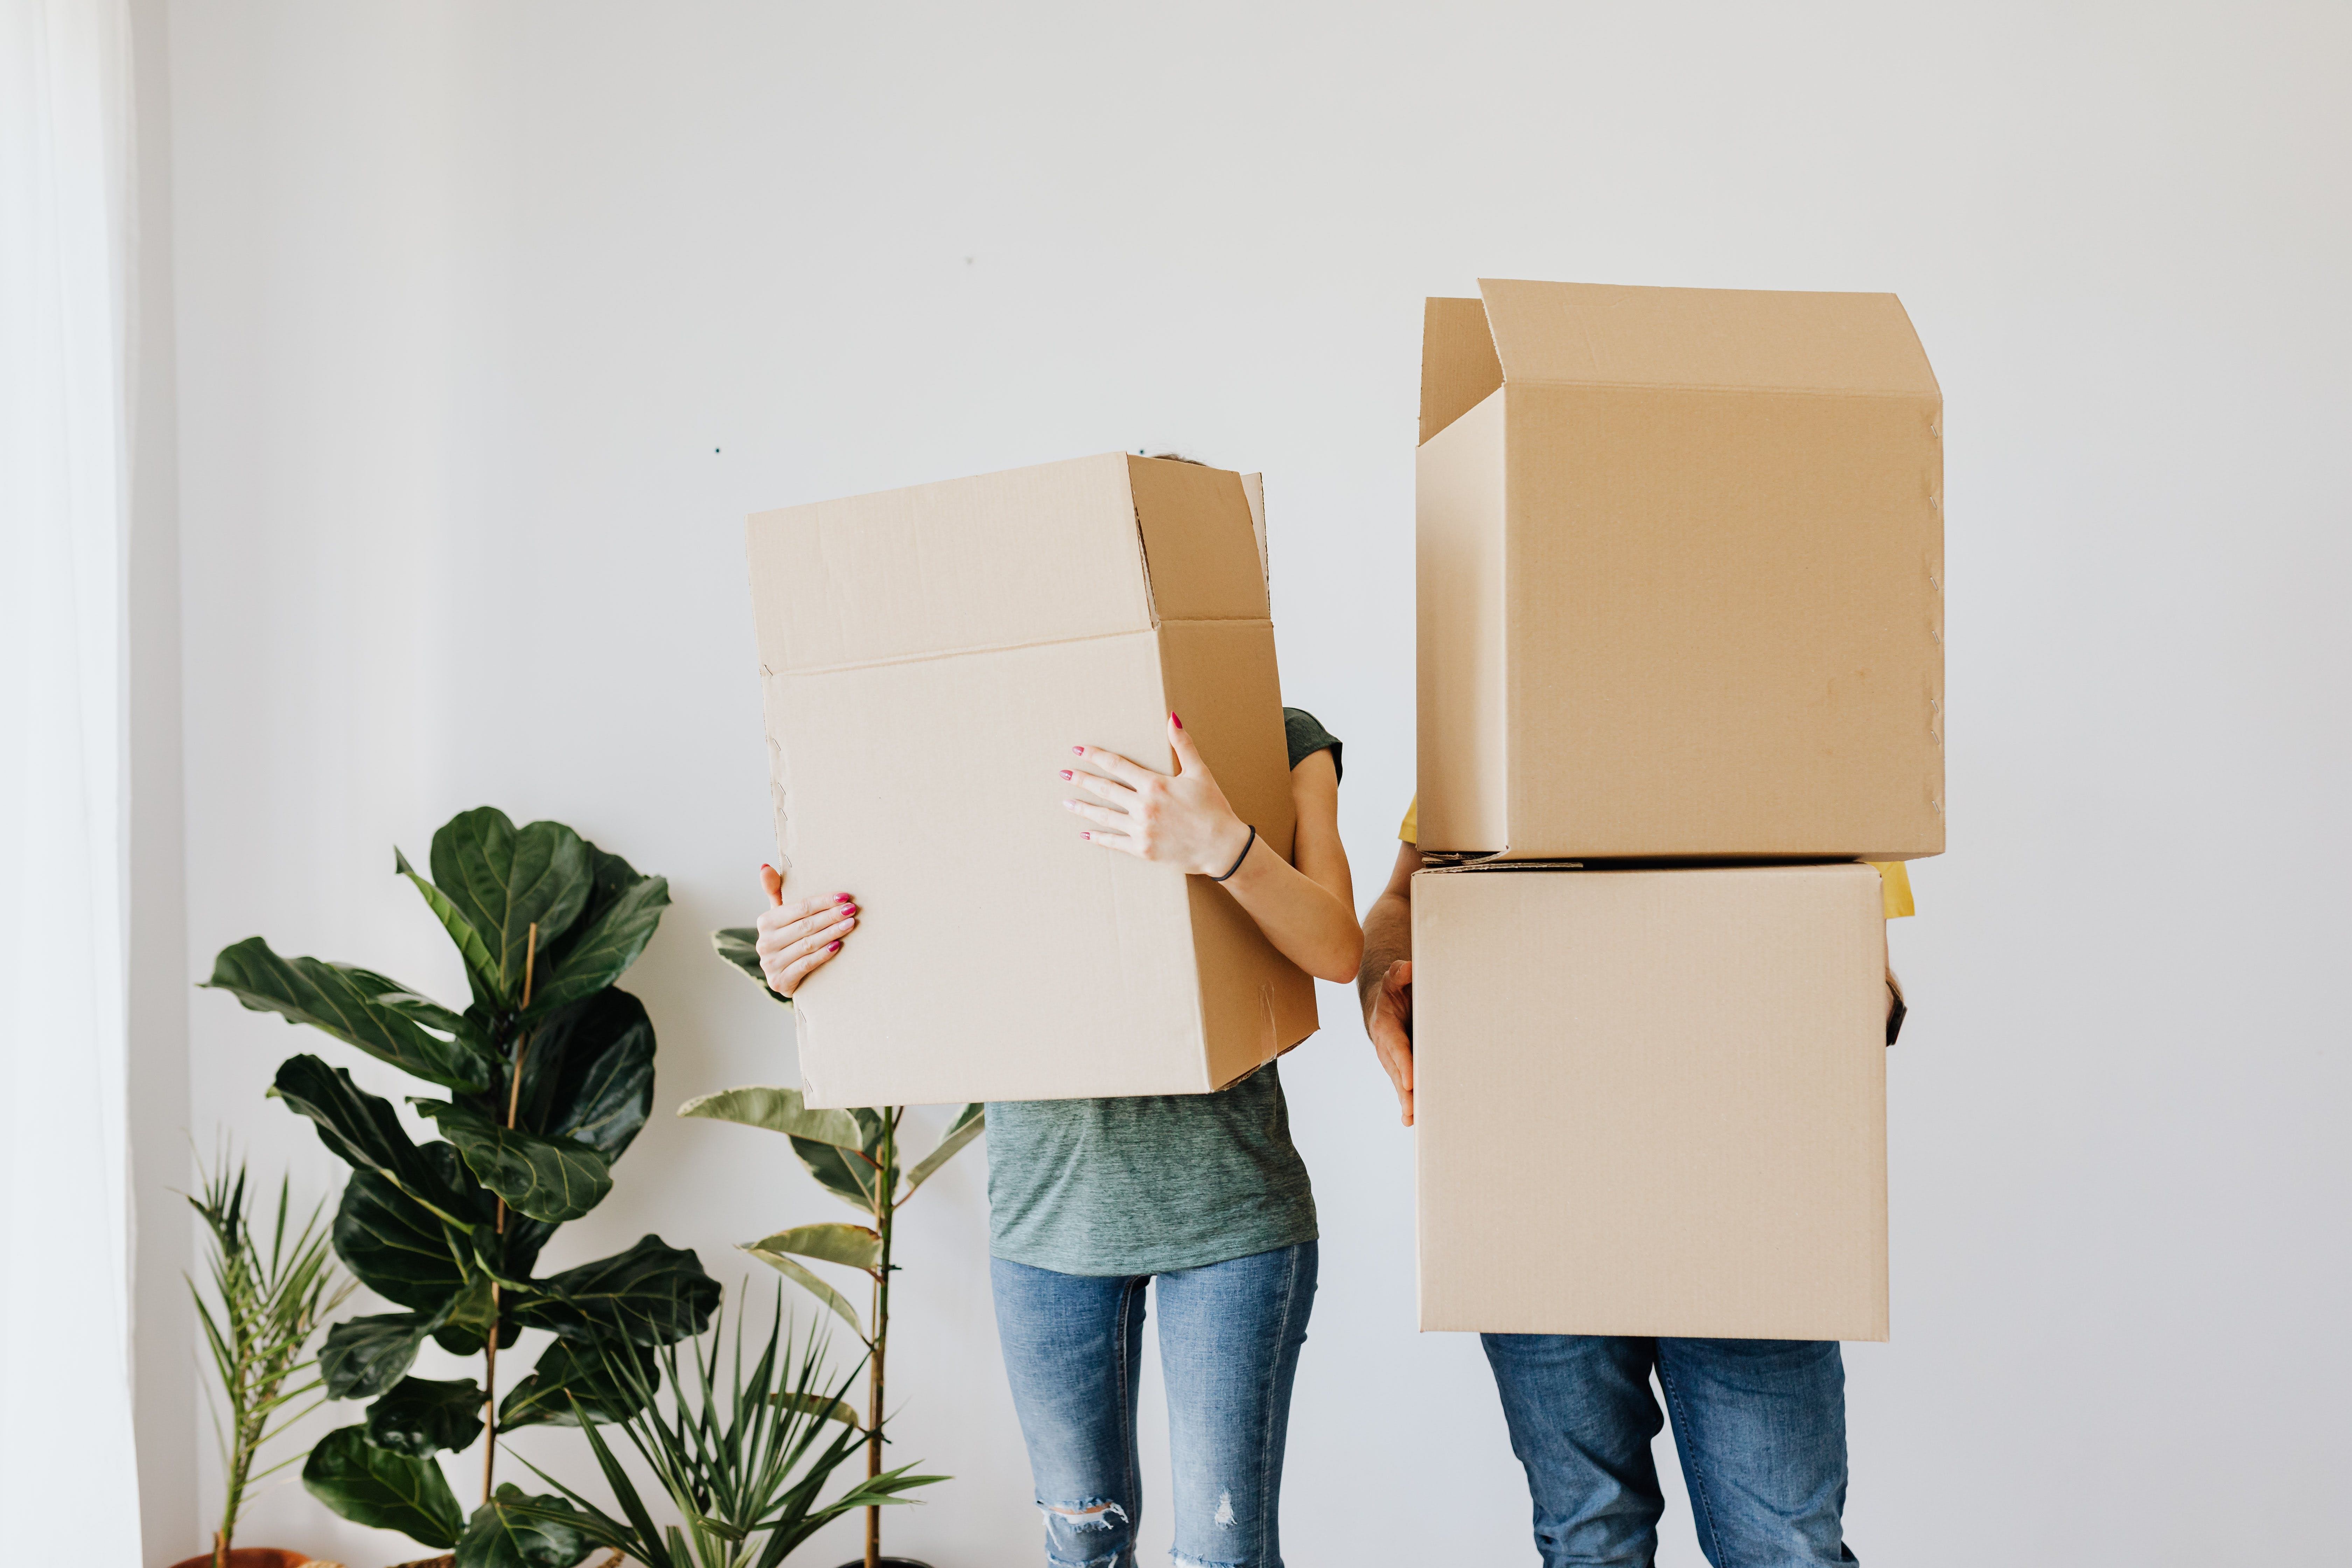 People carrying moving boxes | Source: Pexels